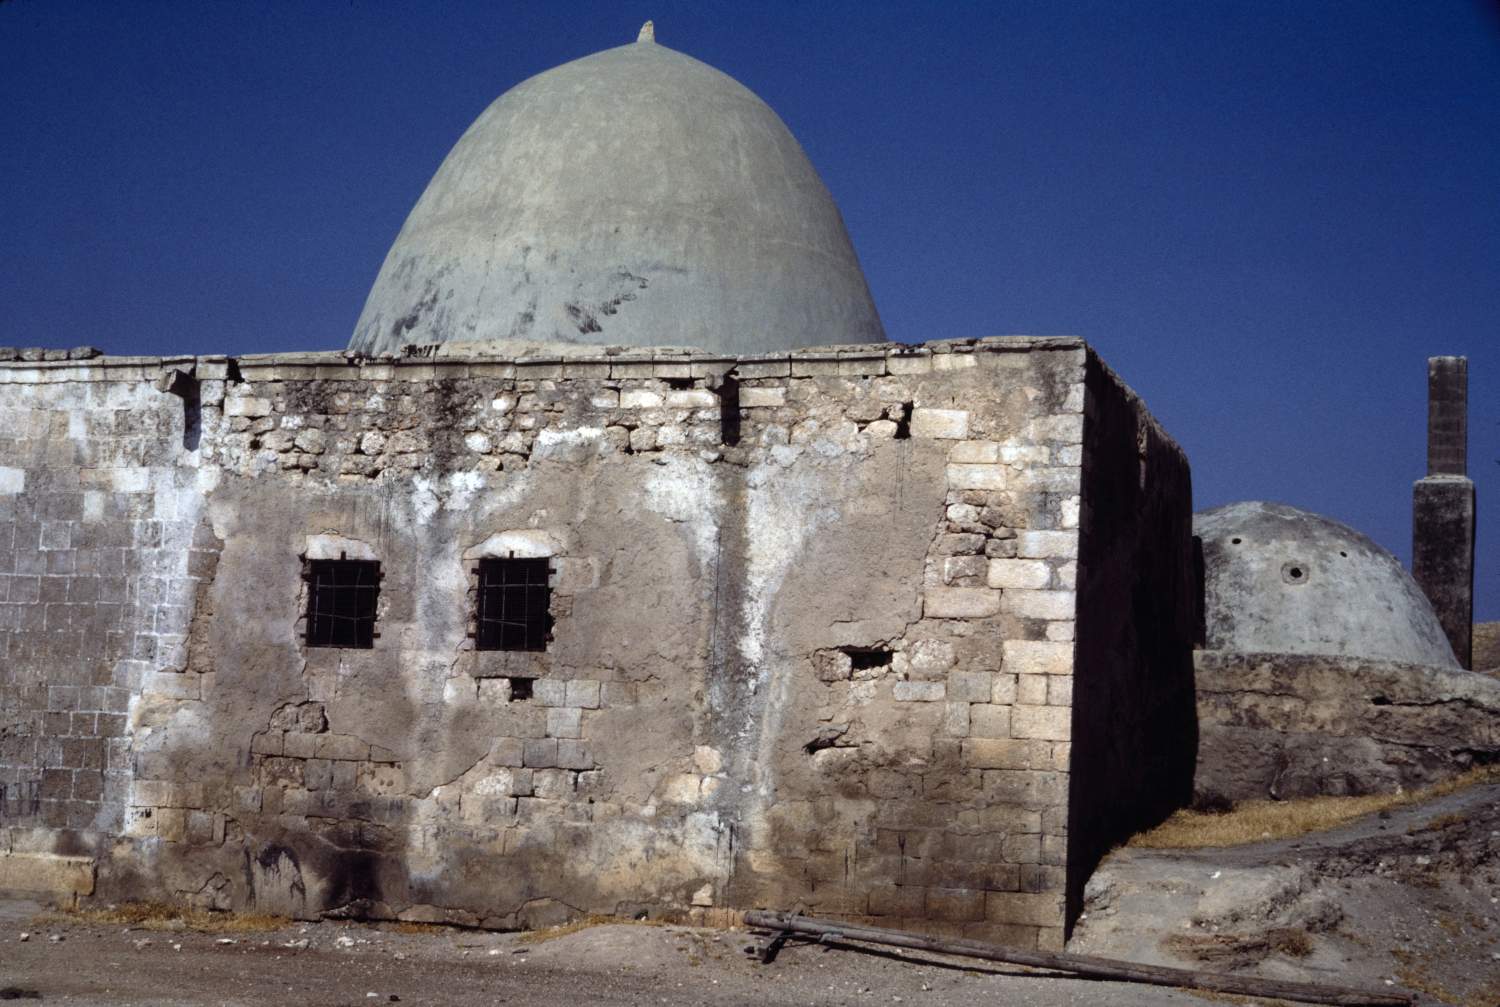 Exterior view. The dome of one of the subterranean inner chambers is visible at right.